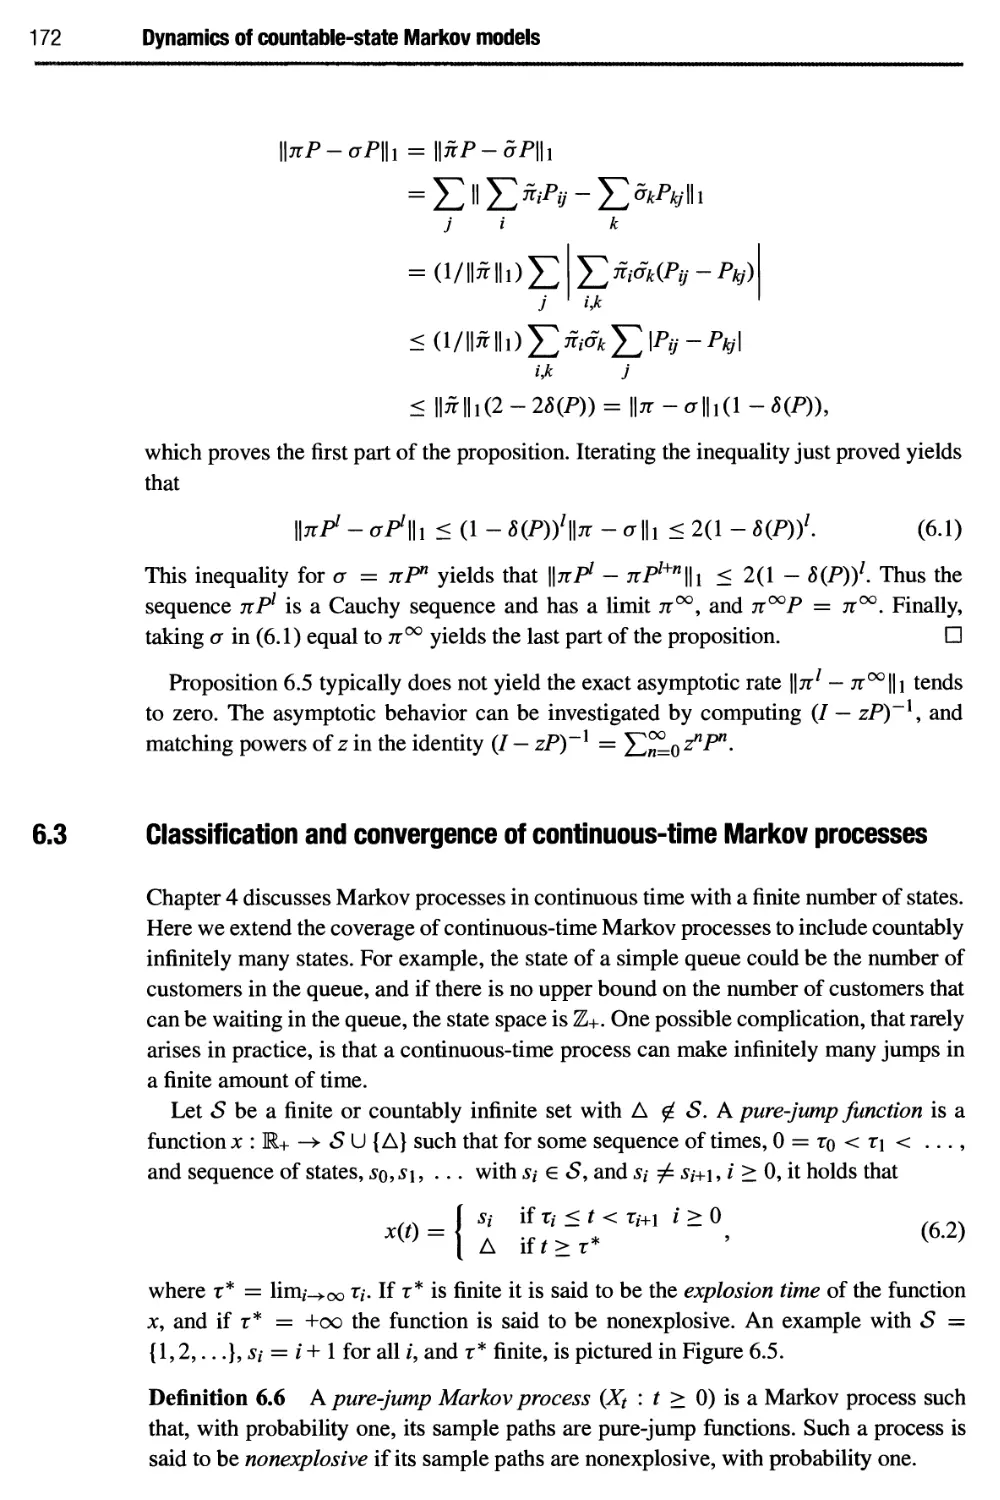 6.3 Classification and convergence of continuous-time Markov processes 172